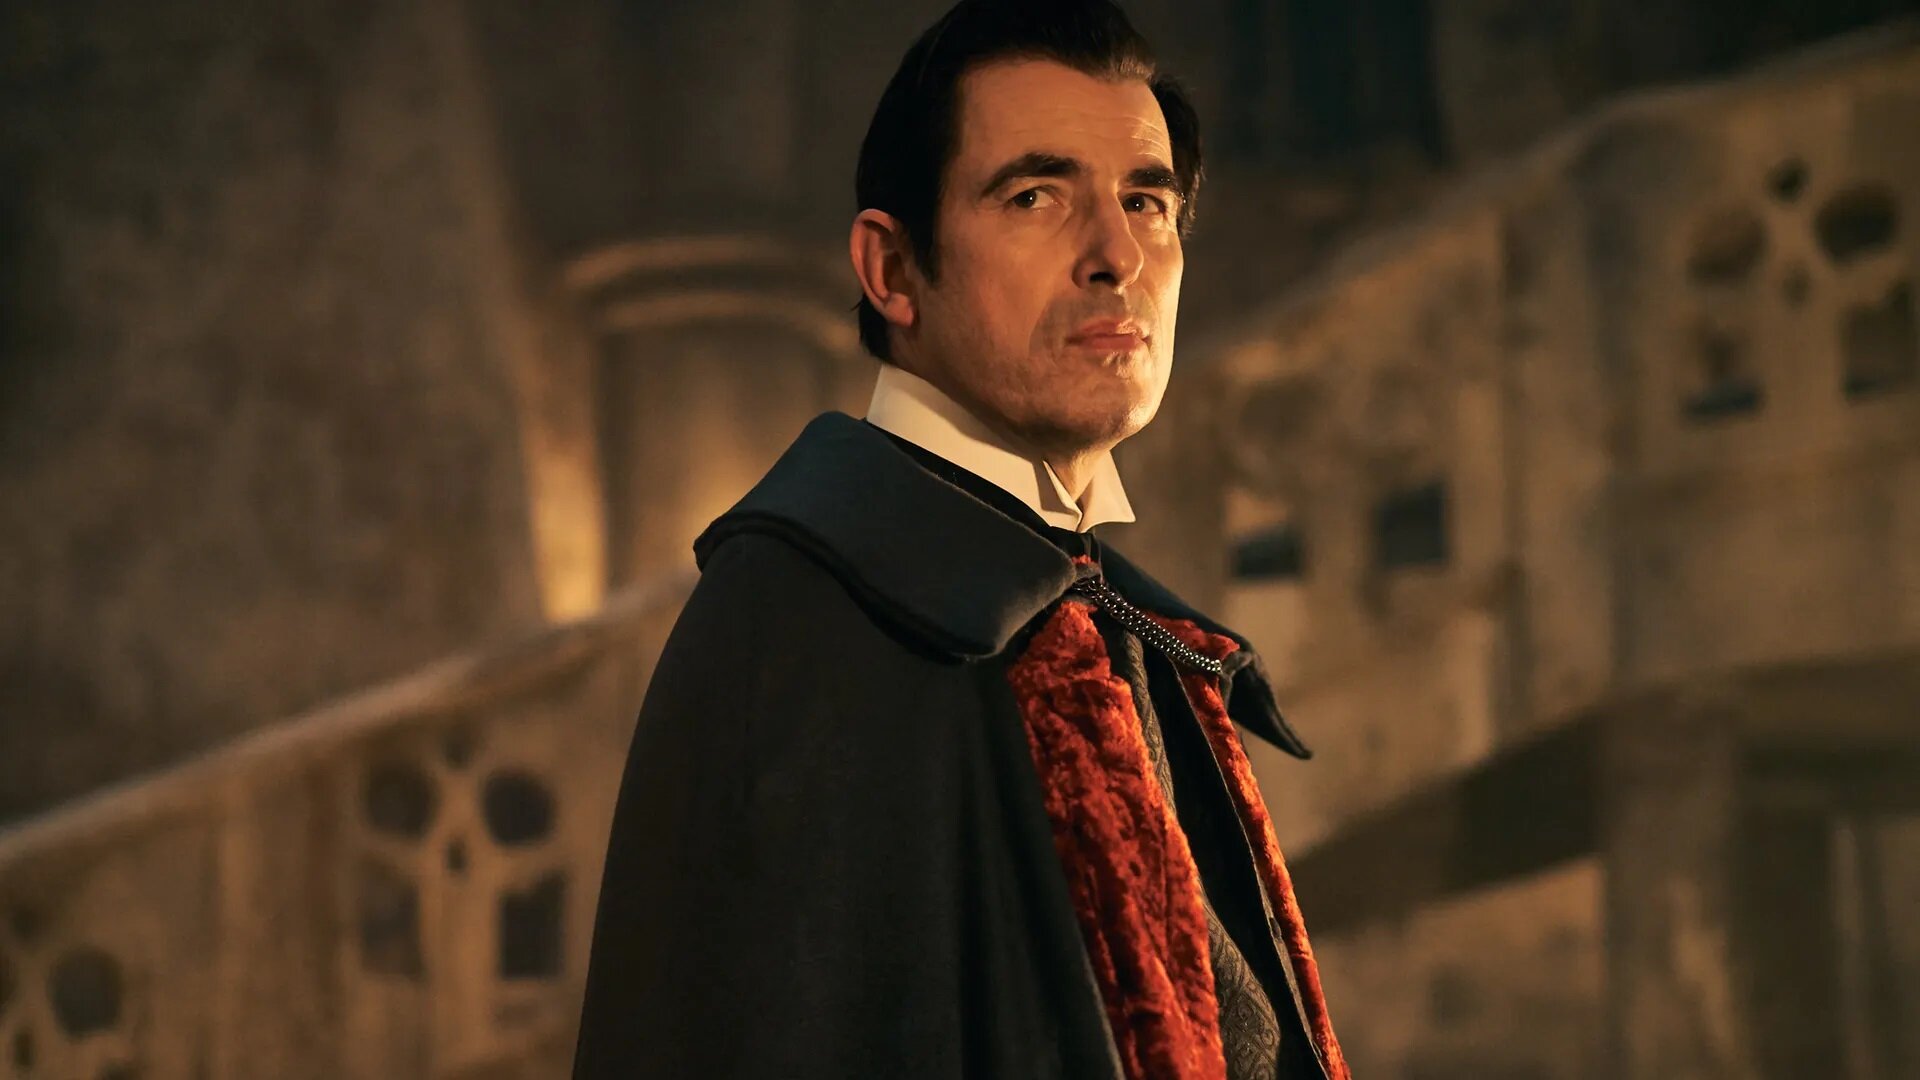 Dracula, dressed in a black cloak with red scarf looks towards the camera